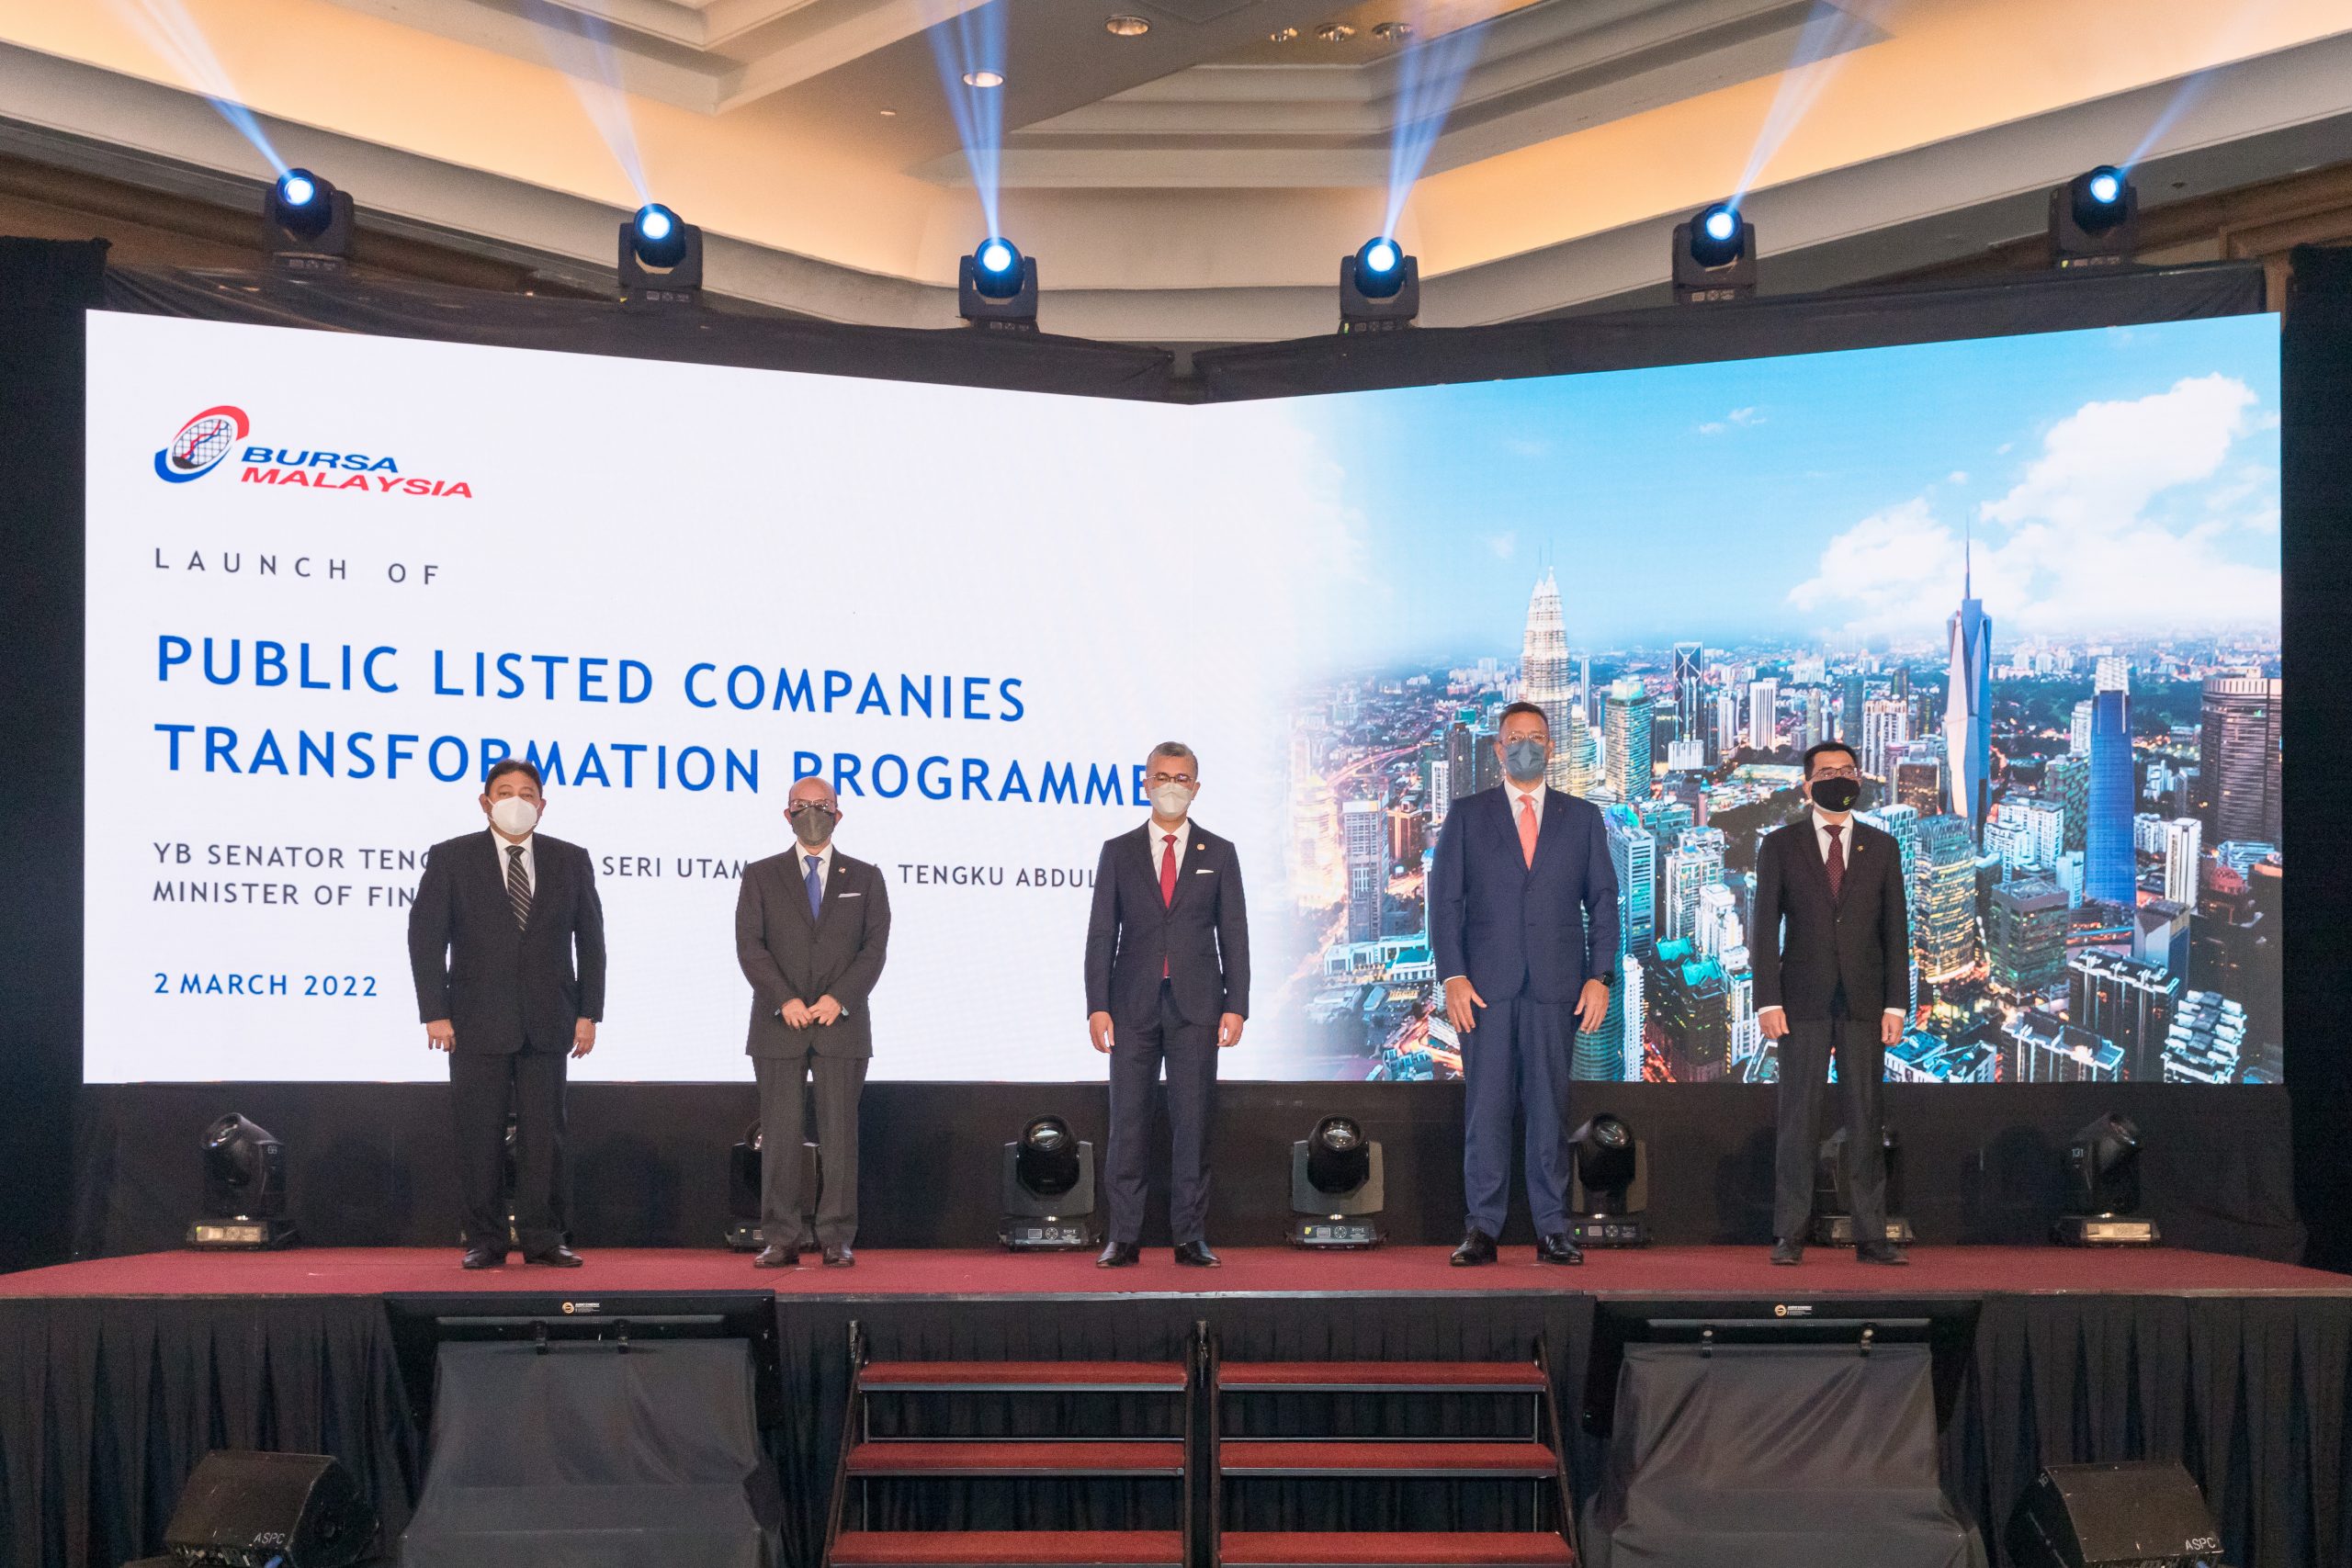 Launch of Public Listed Companies Transformation Programme